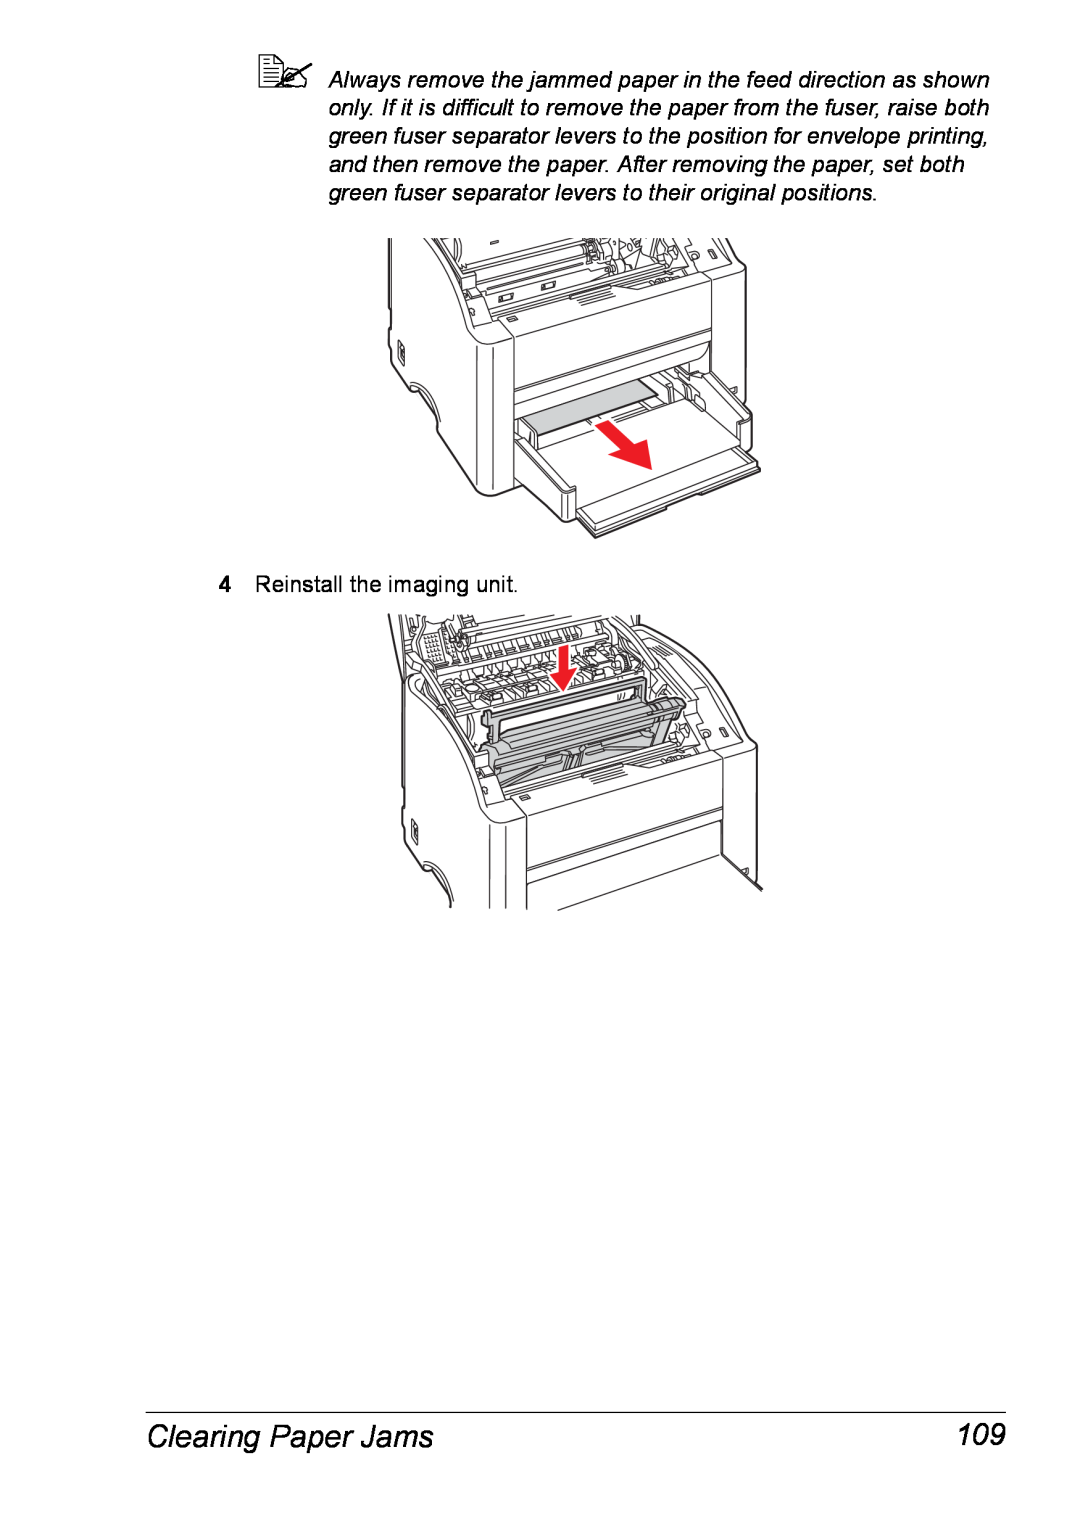 Xerox 6120 manual Clearing Paper Jams, Reinstall the imaging unit 